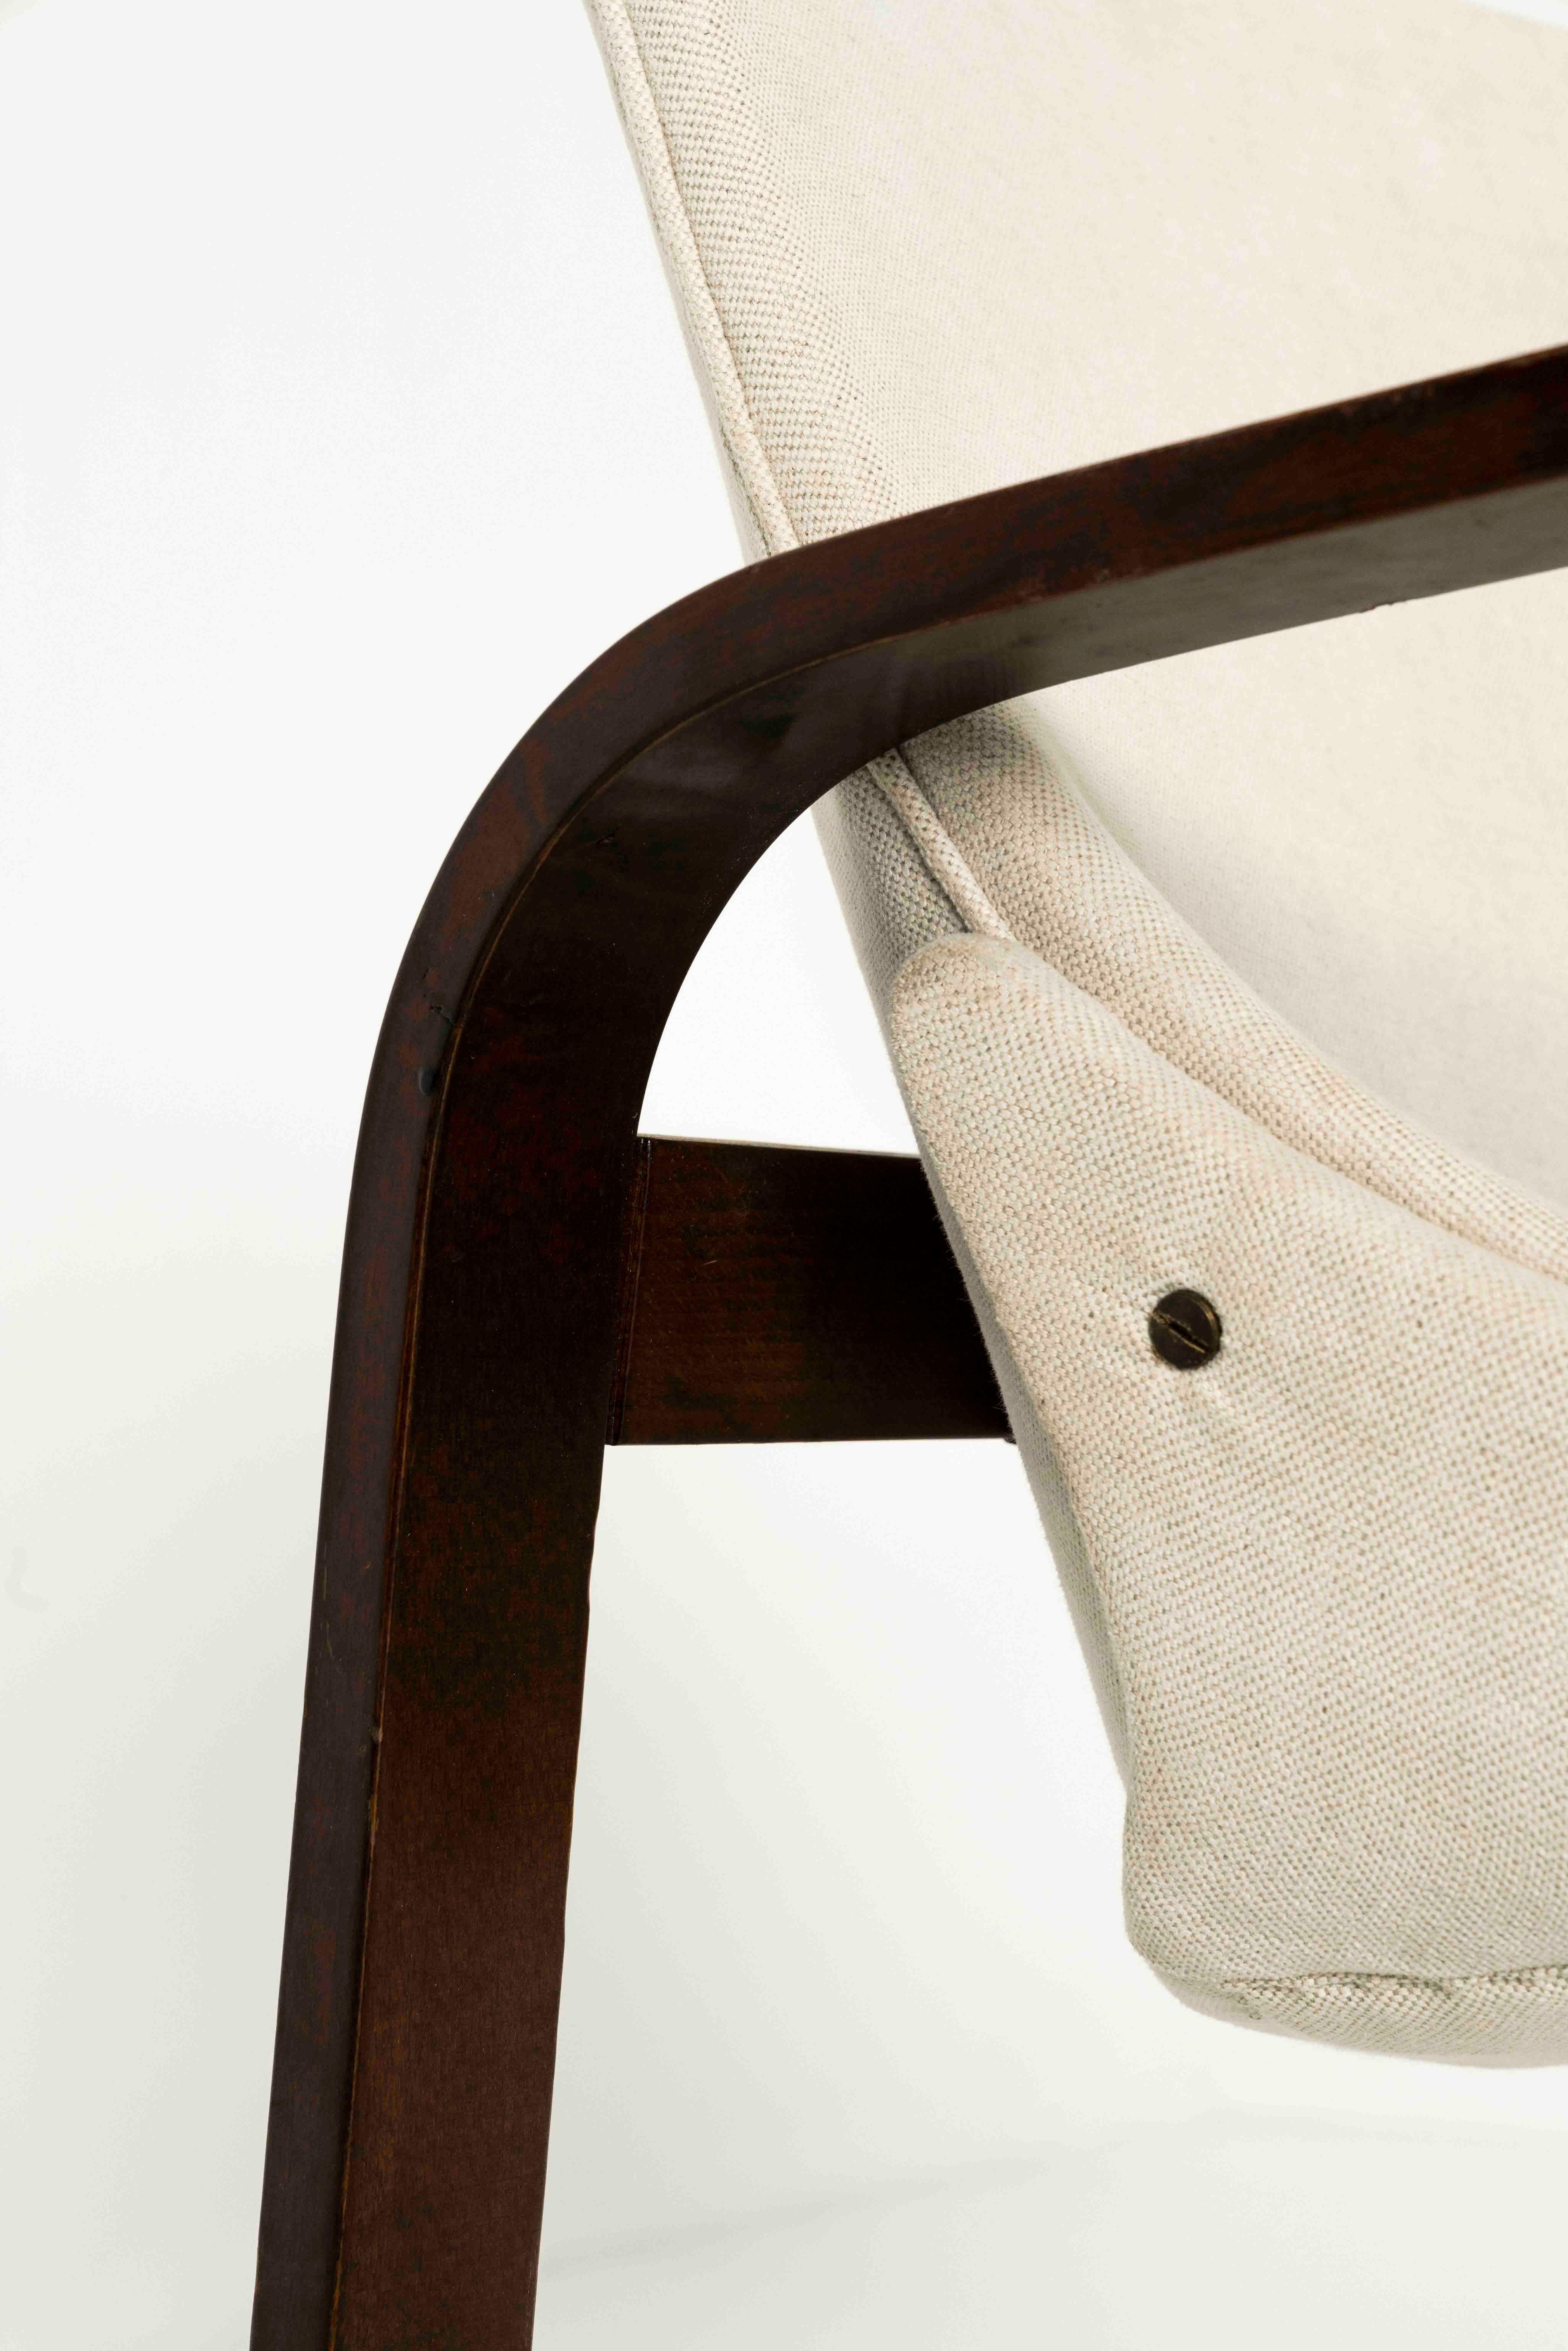 Fabric Arm Chair by Giuseppe Pagano Pogatschnig and Gino Maggioni, Italy 1940s For Sale